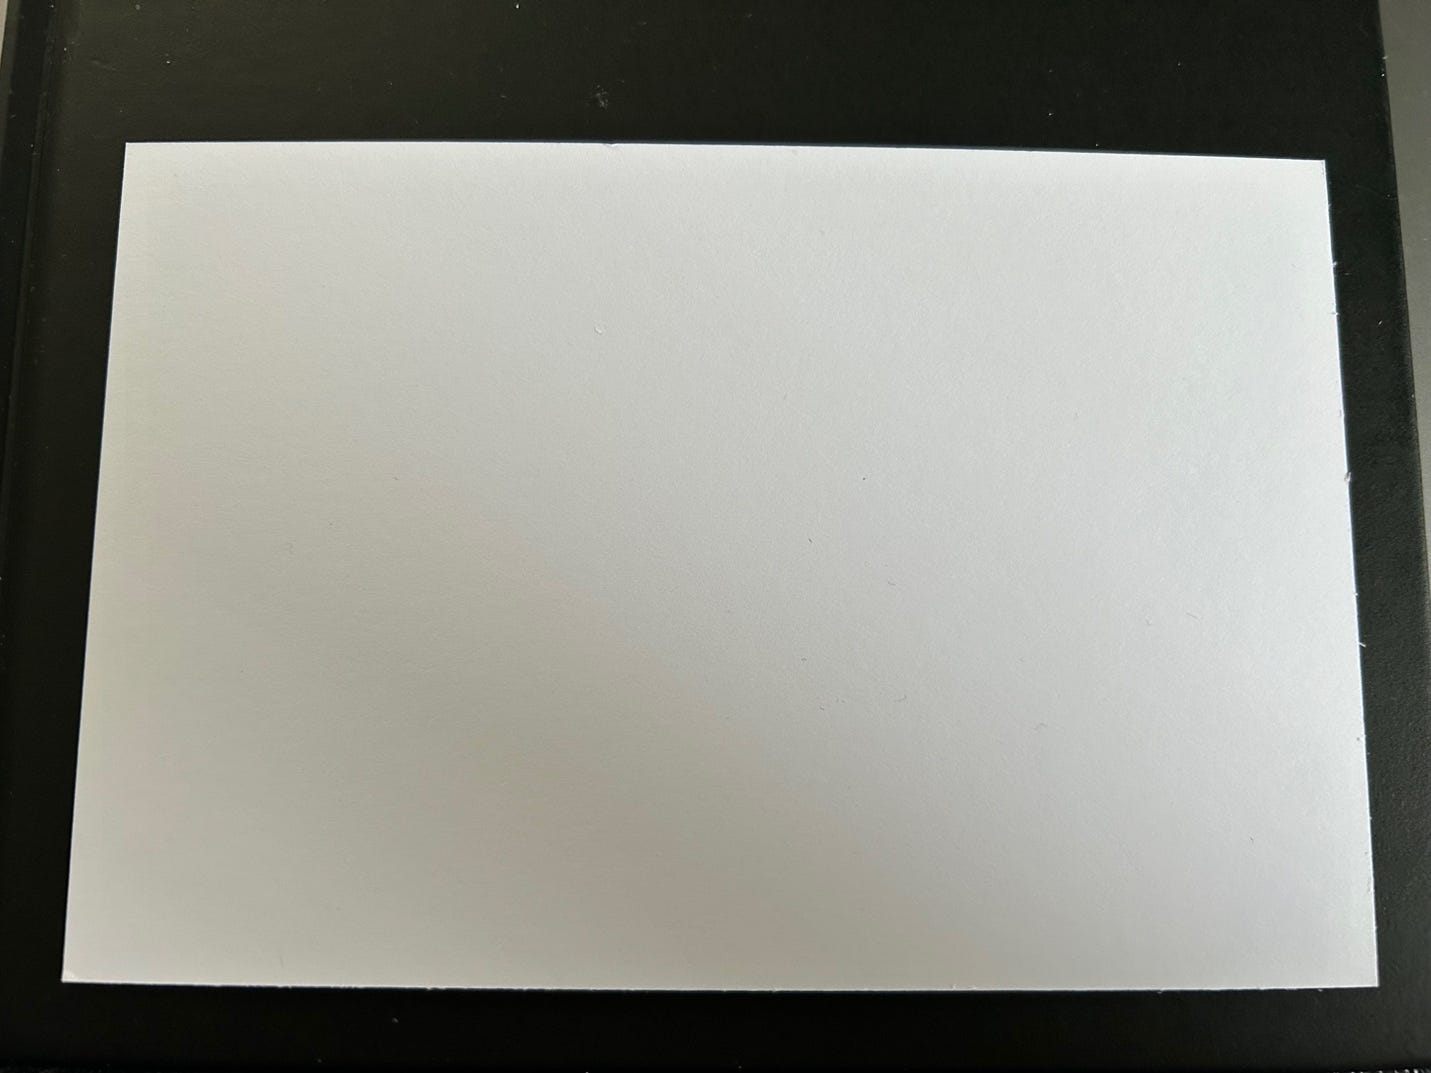 A white rectangular object on a black surface

Description automatically generated